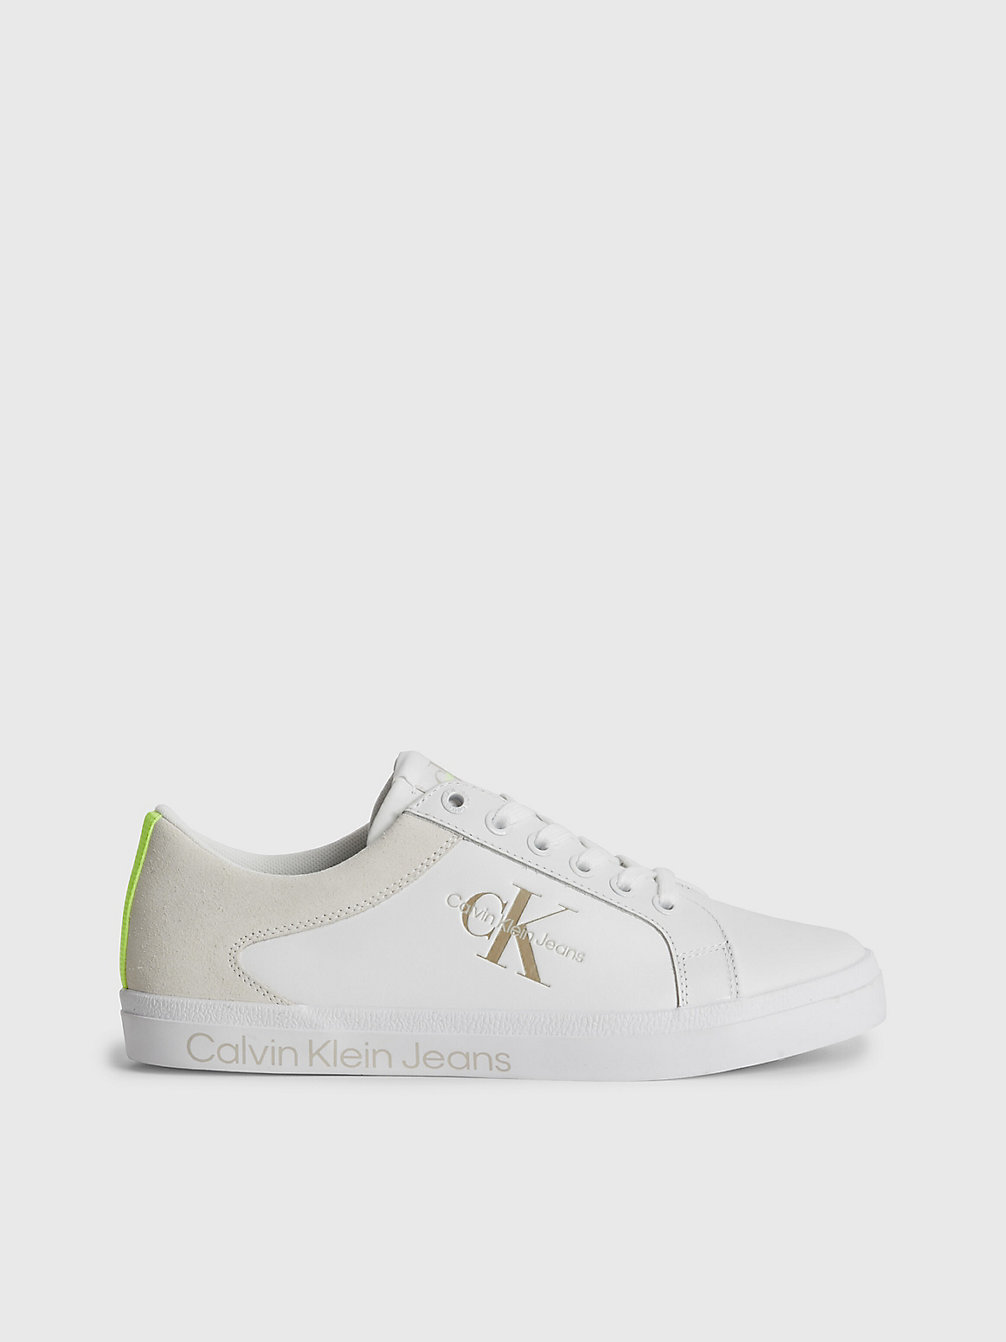 WHITE Leather Trainers undefined women Calvin Klein